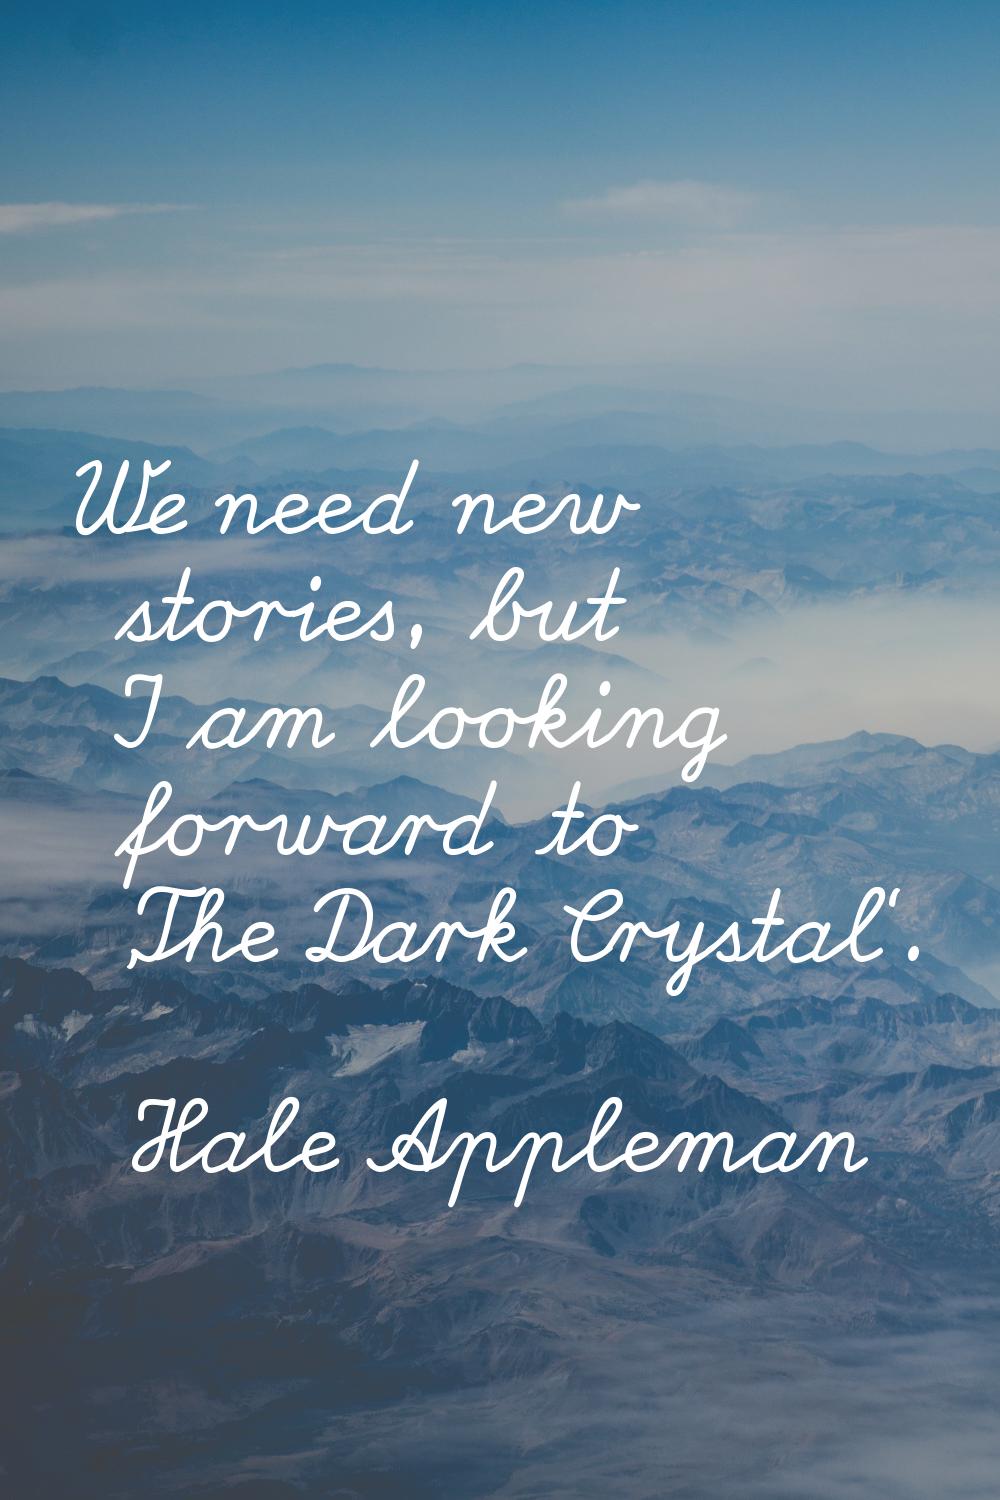 We need new stories, but I am looking forward to 'The Dark Crystal'.